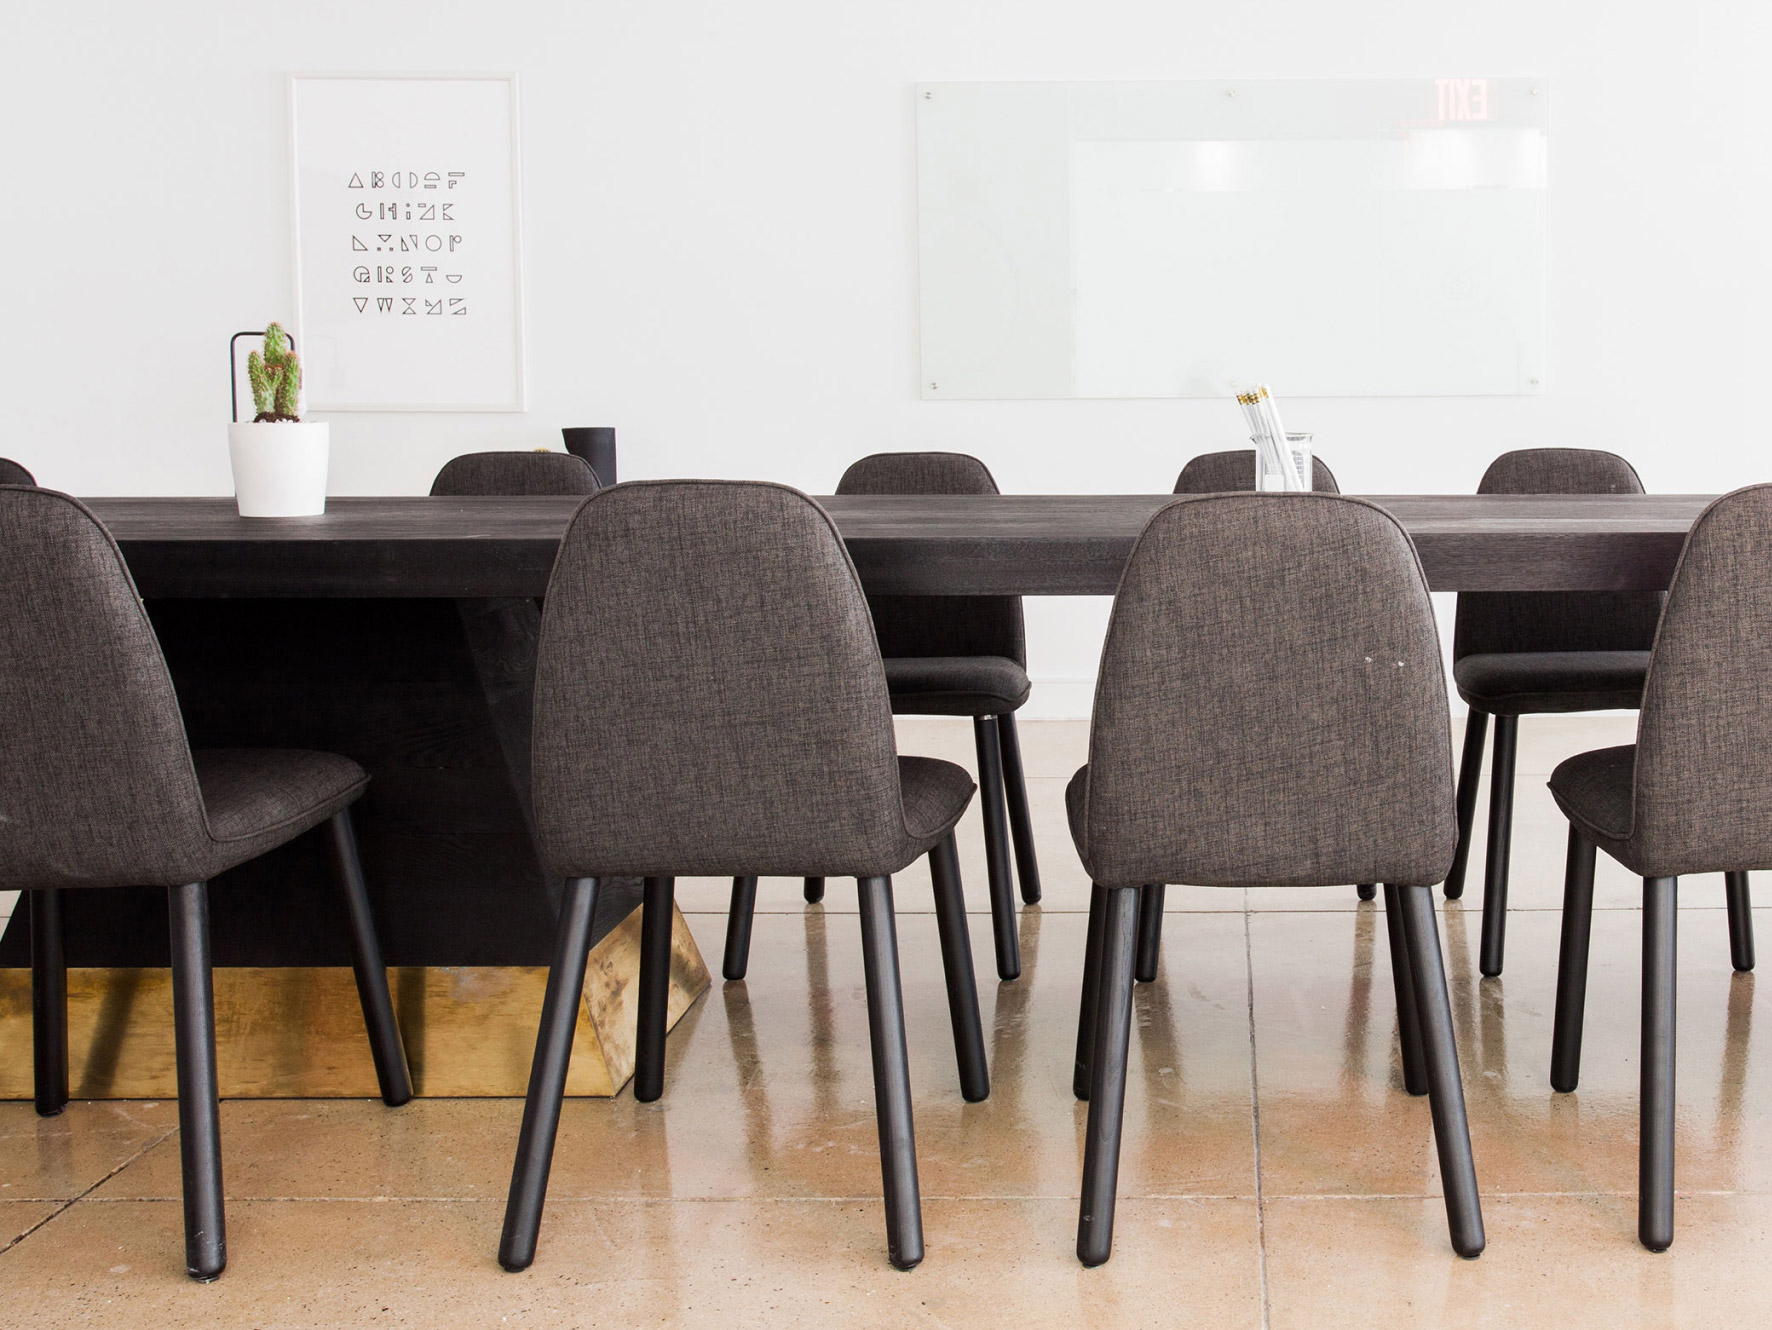 A picture of grey chairs at a black conference table